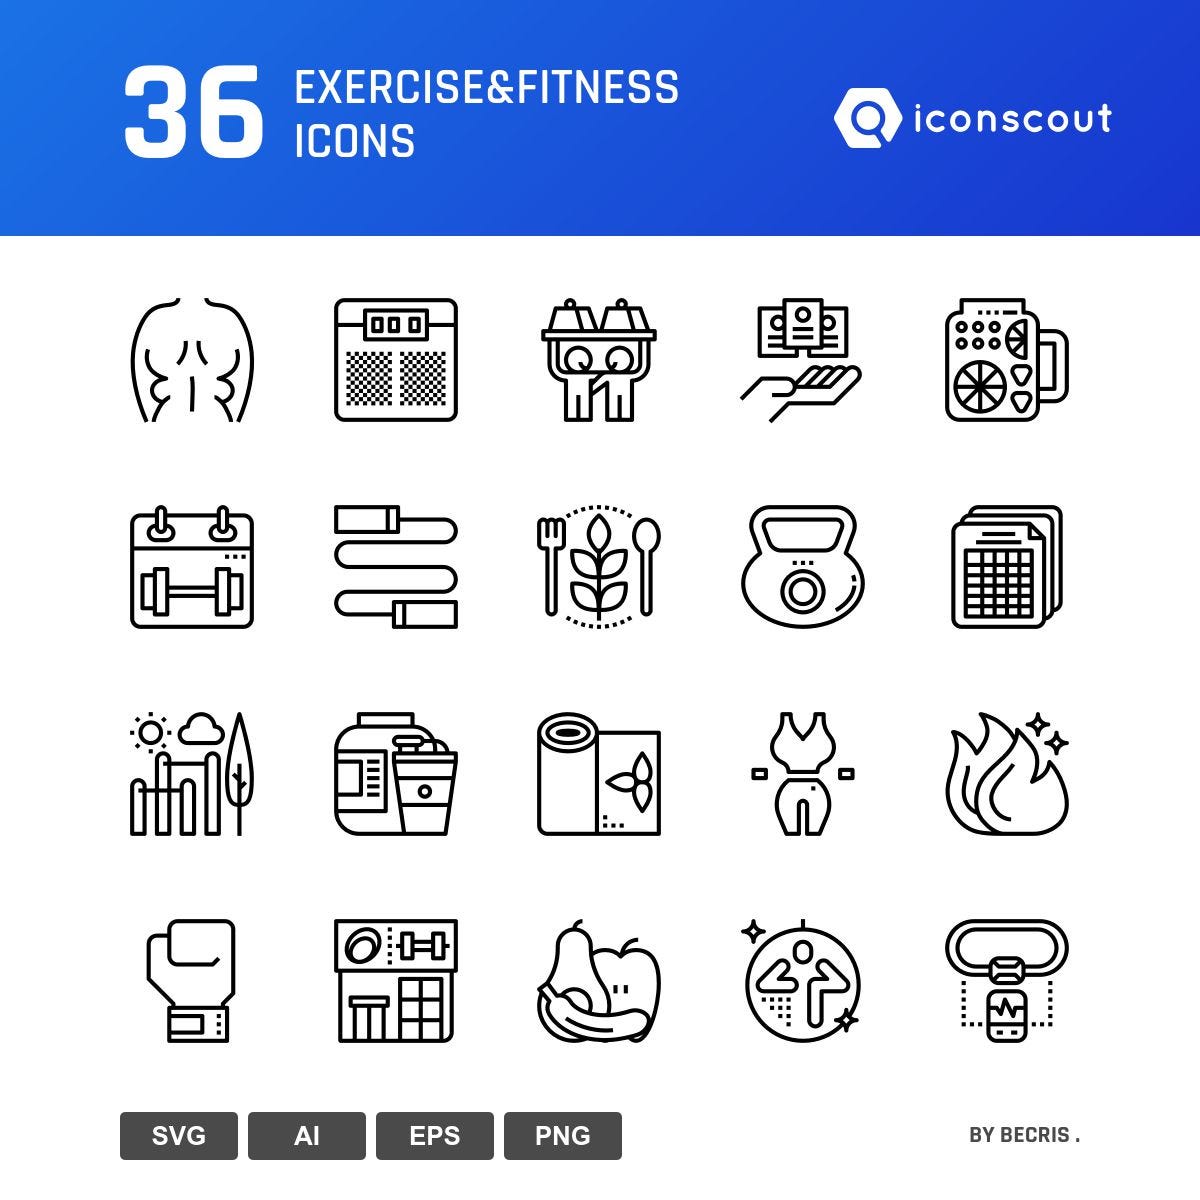 500+ Gym and Fitness icons, AI, EPS, SVG, PNG, by Iconscout, Iconscout -  Design Assets Marketplace